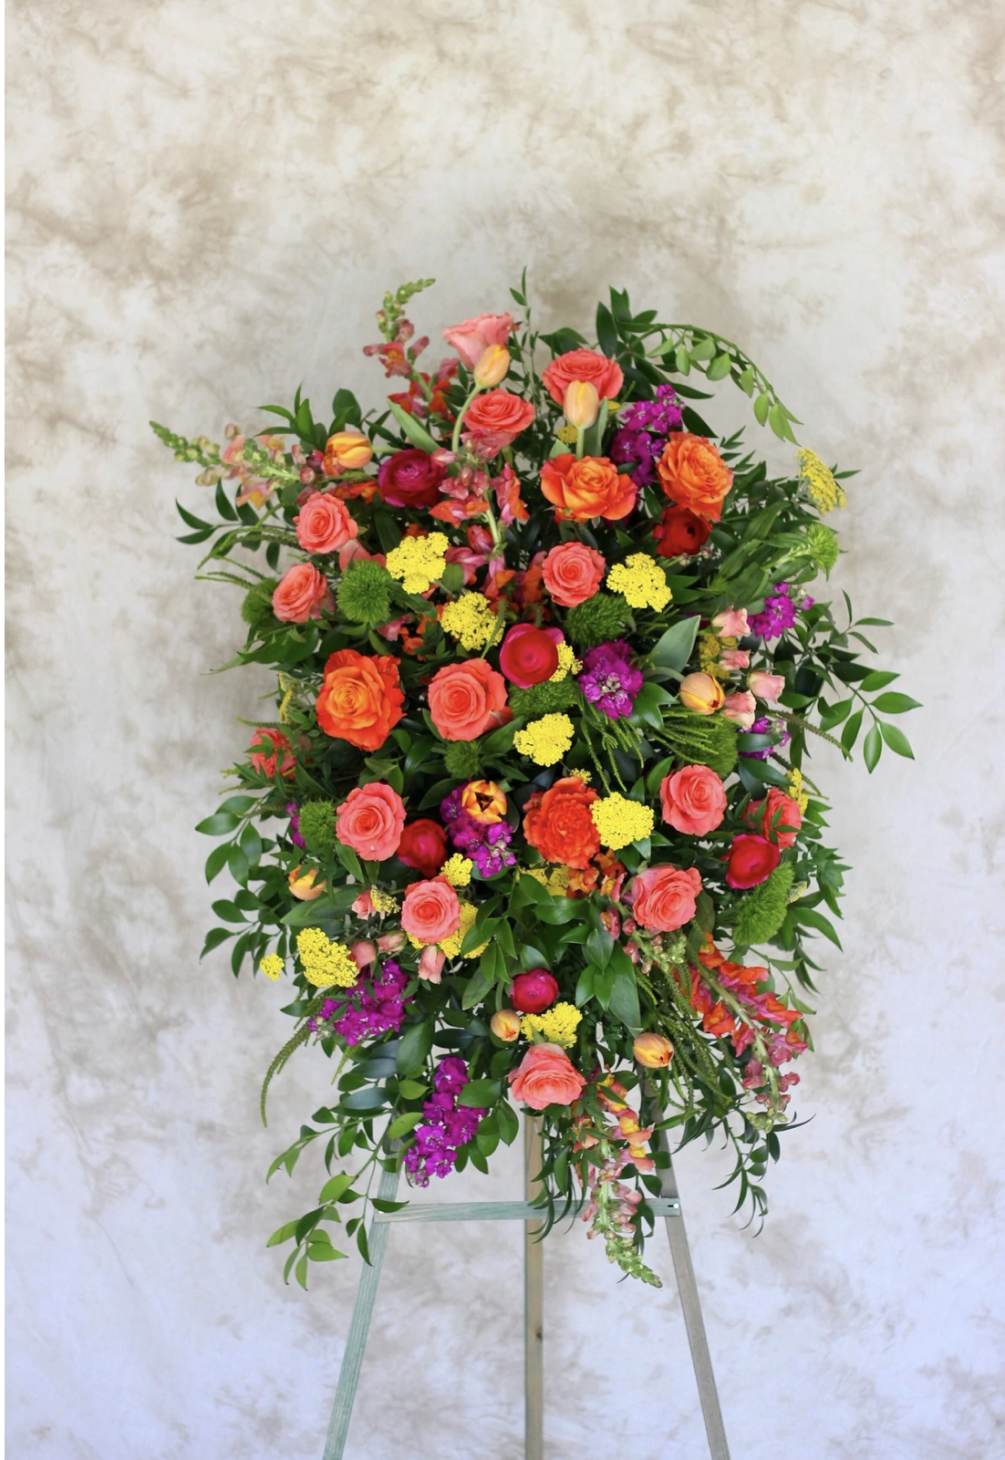 A high-impact design featuring gorgeous seasonal blooms in sunset shades of pink